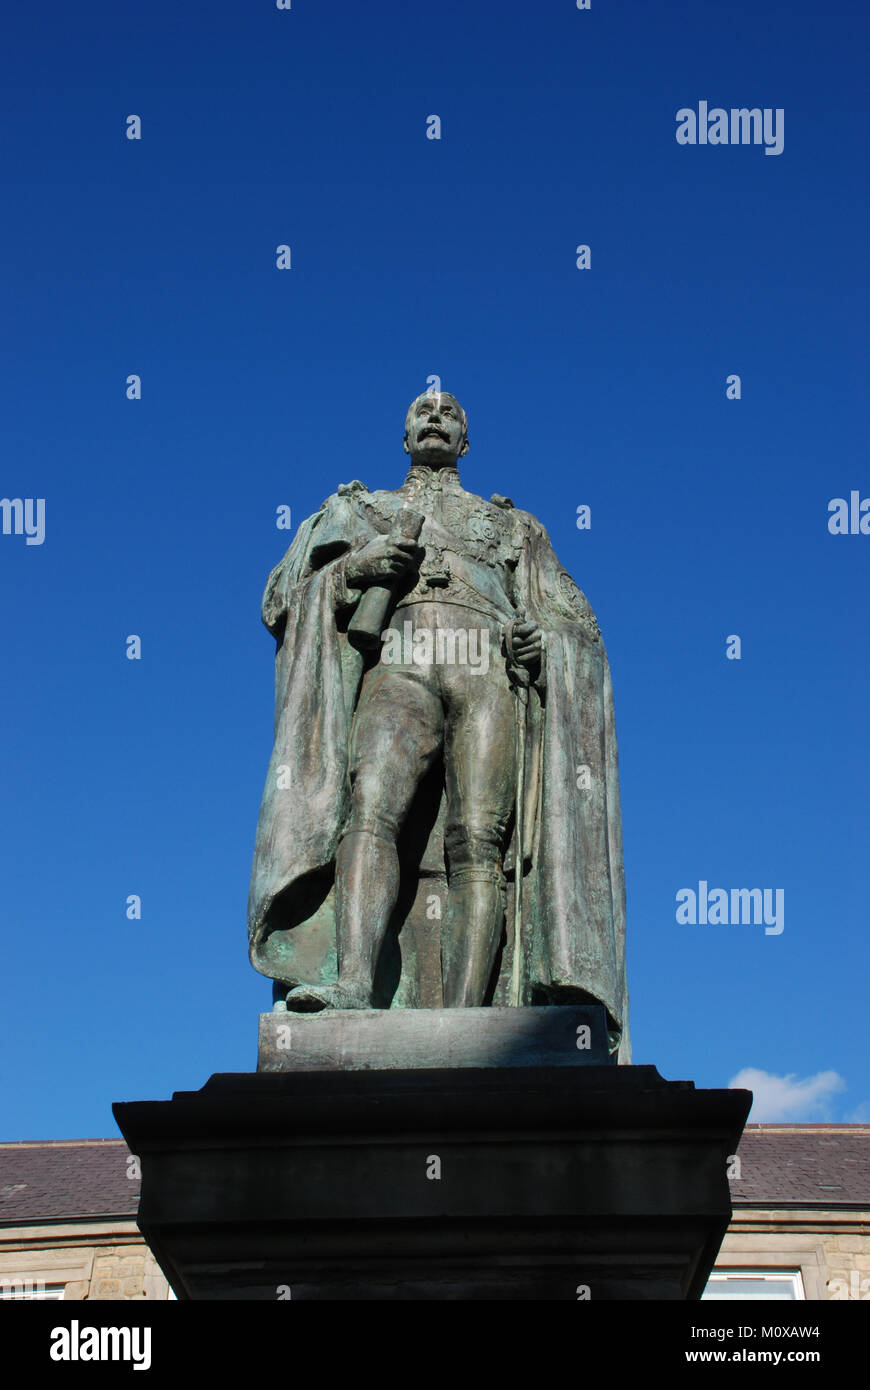 Statue of Lord Londonderry, Seaham against a bright blue sky Stock Photo